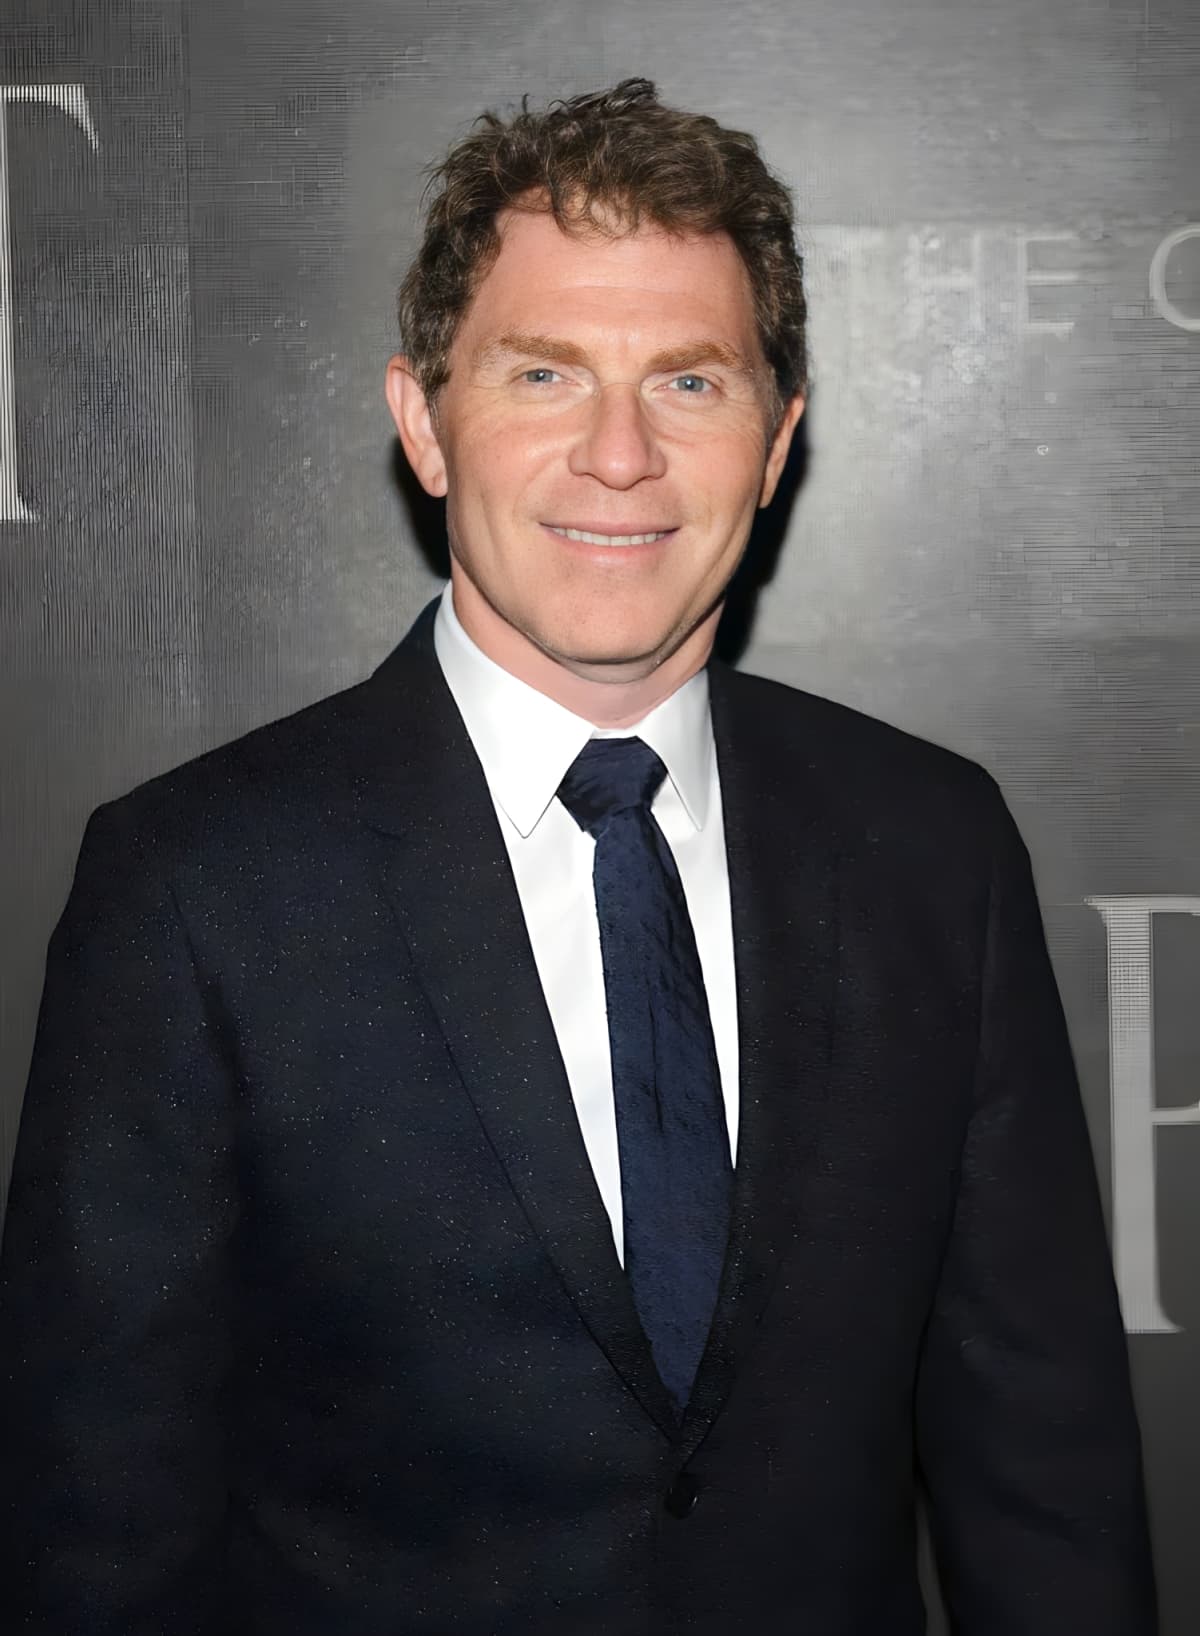 Chef Bobby Flay in a black suit